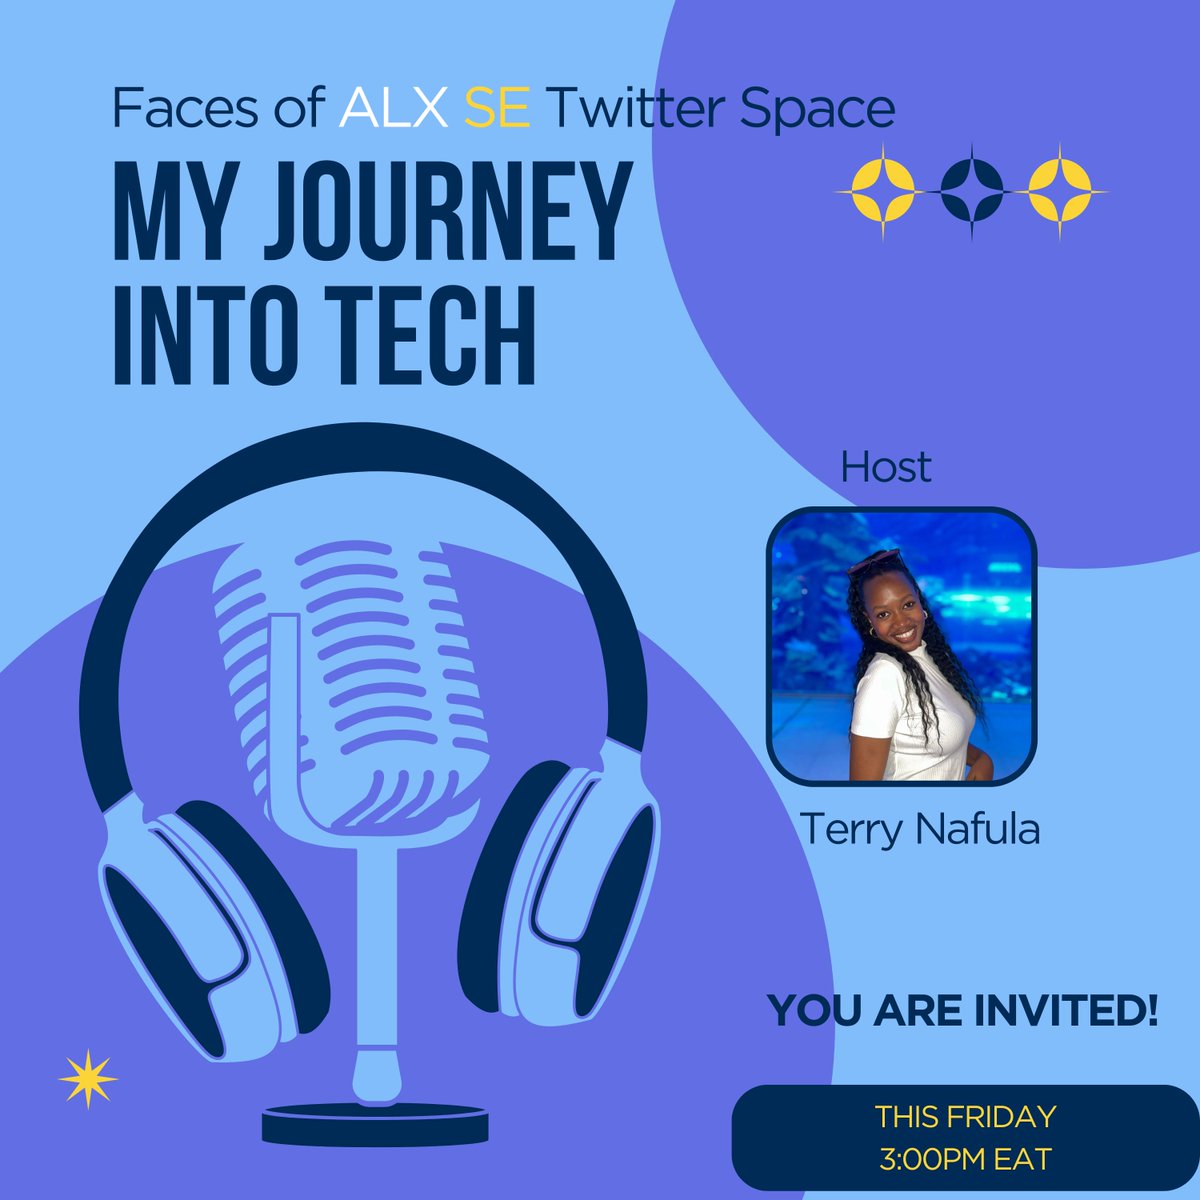 Are you an ALX SE student or alumni? Join us this Friday as we reminisce on the moment you decided to begin your tech journey and how it is going for you so far!